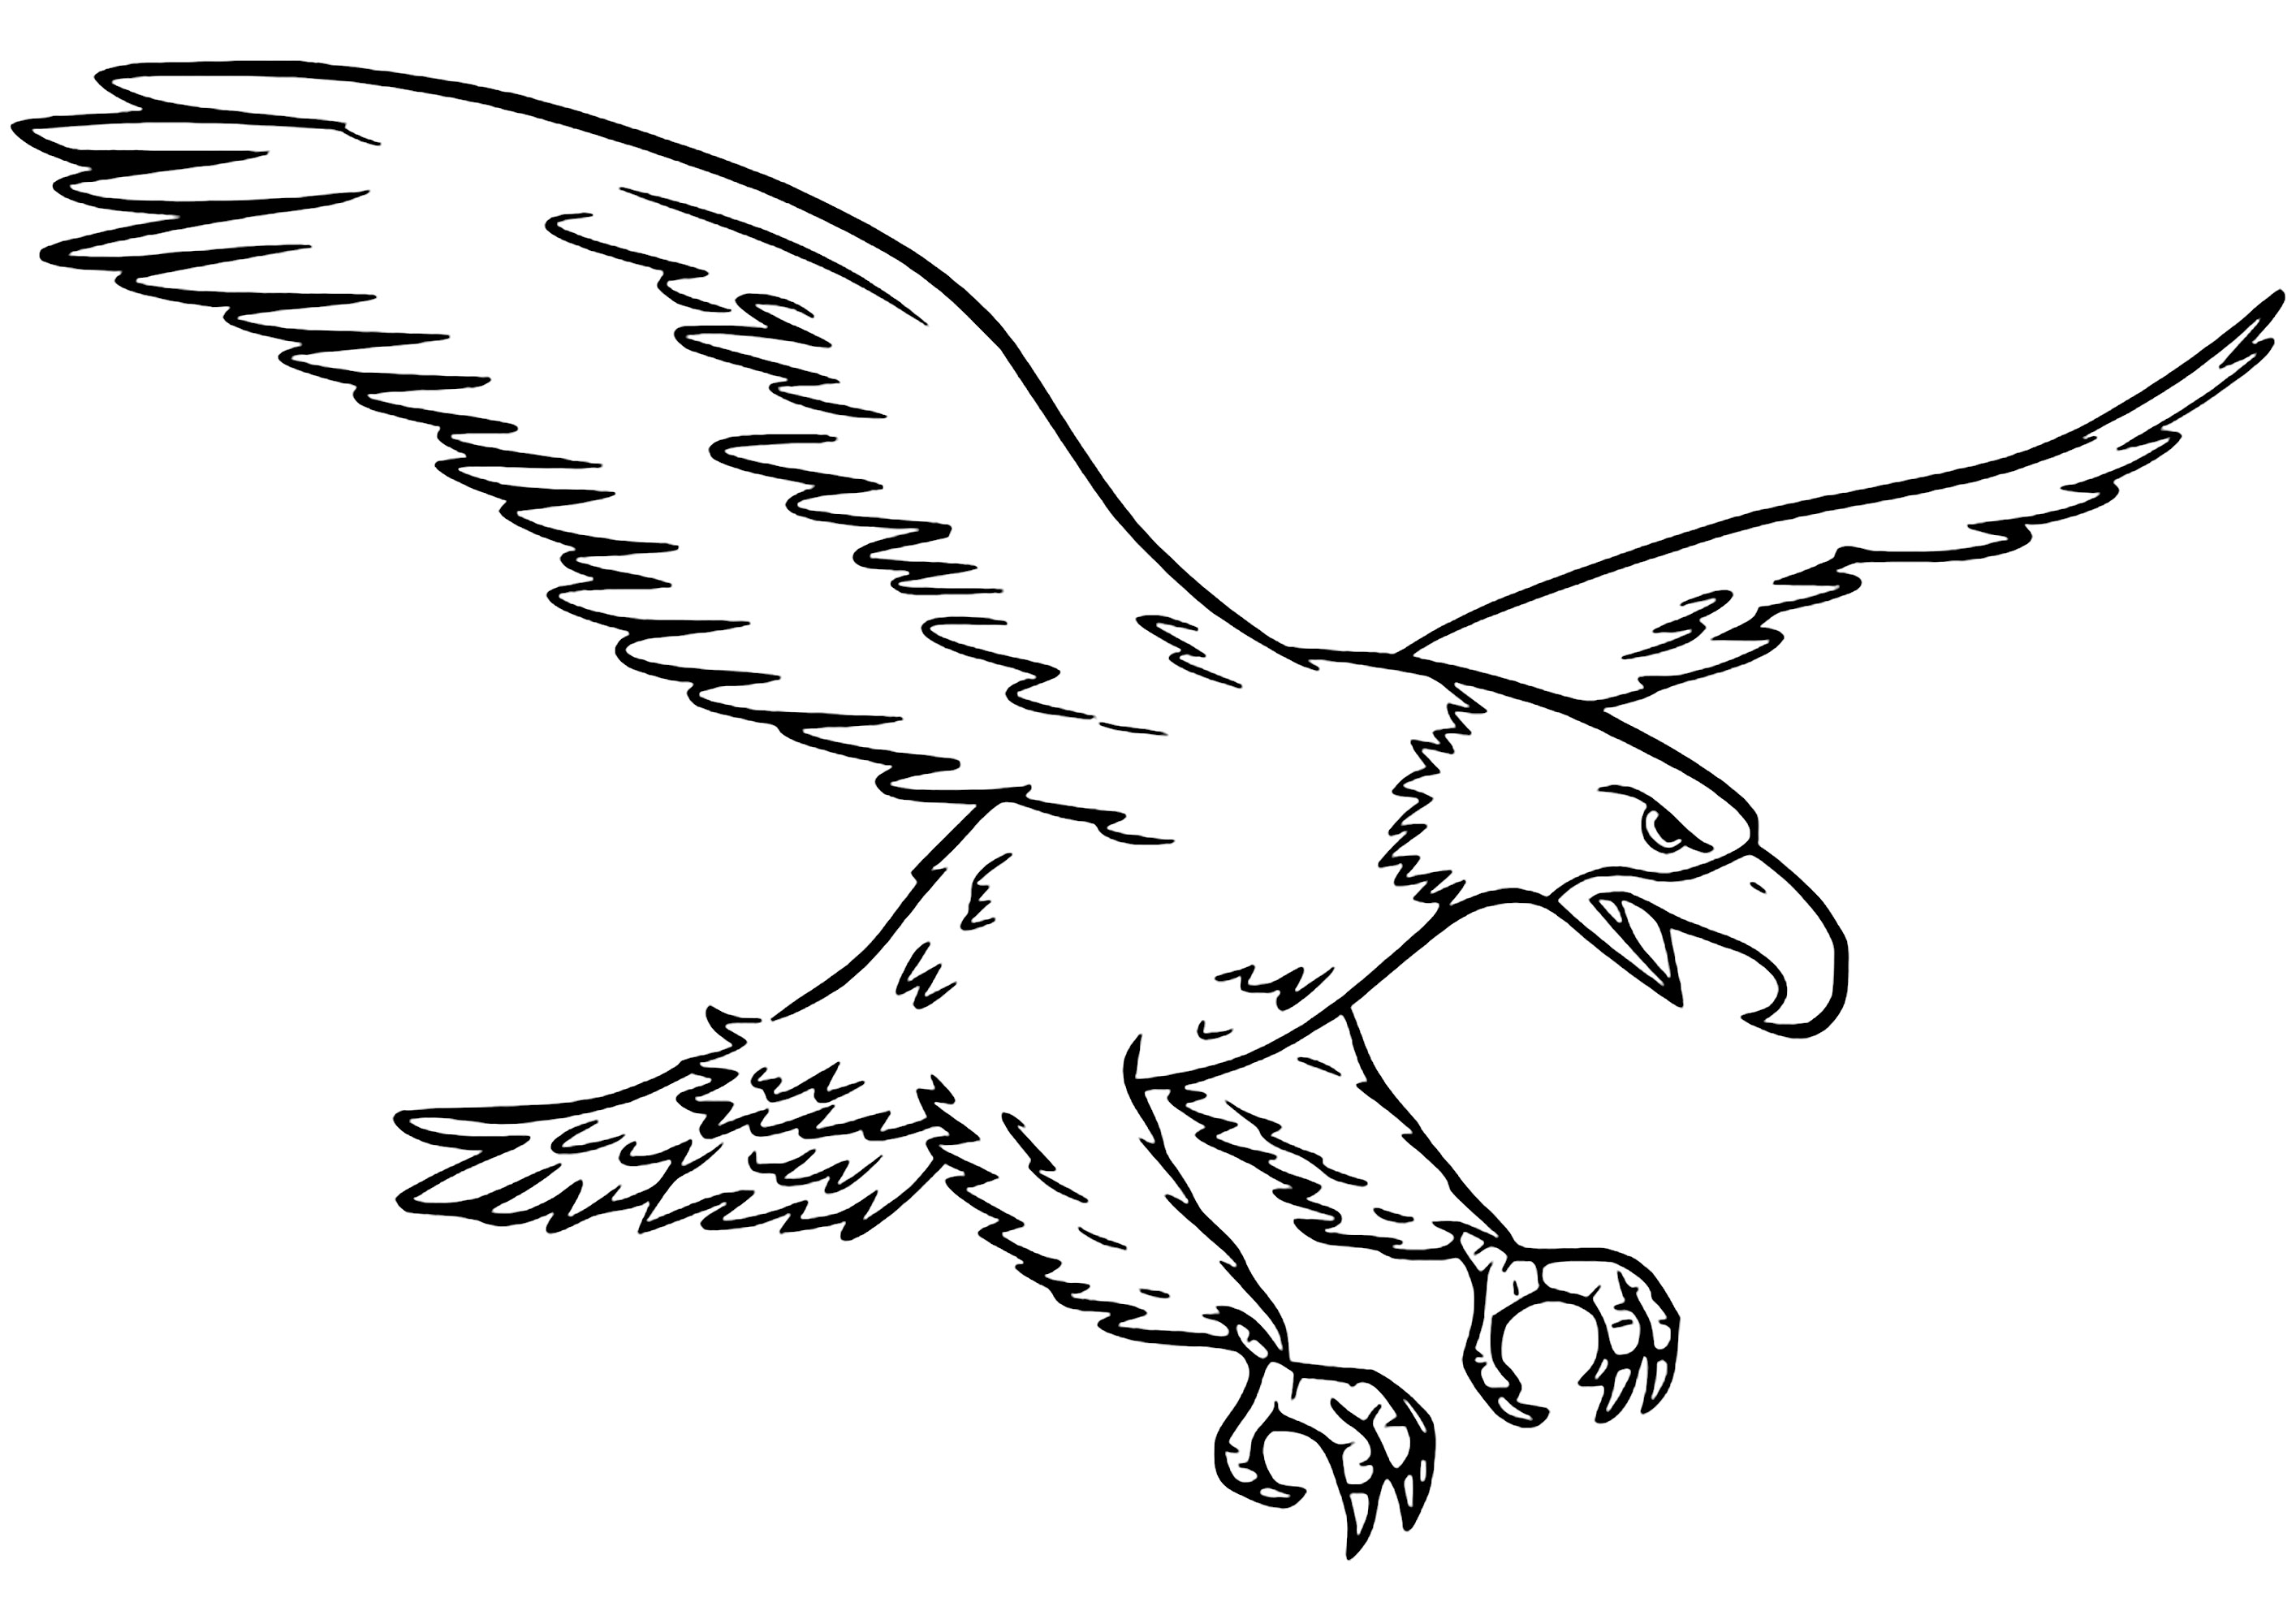 Coloring a majestic eagle. Few areas to color, very realistic